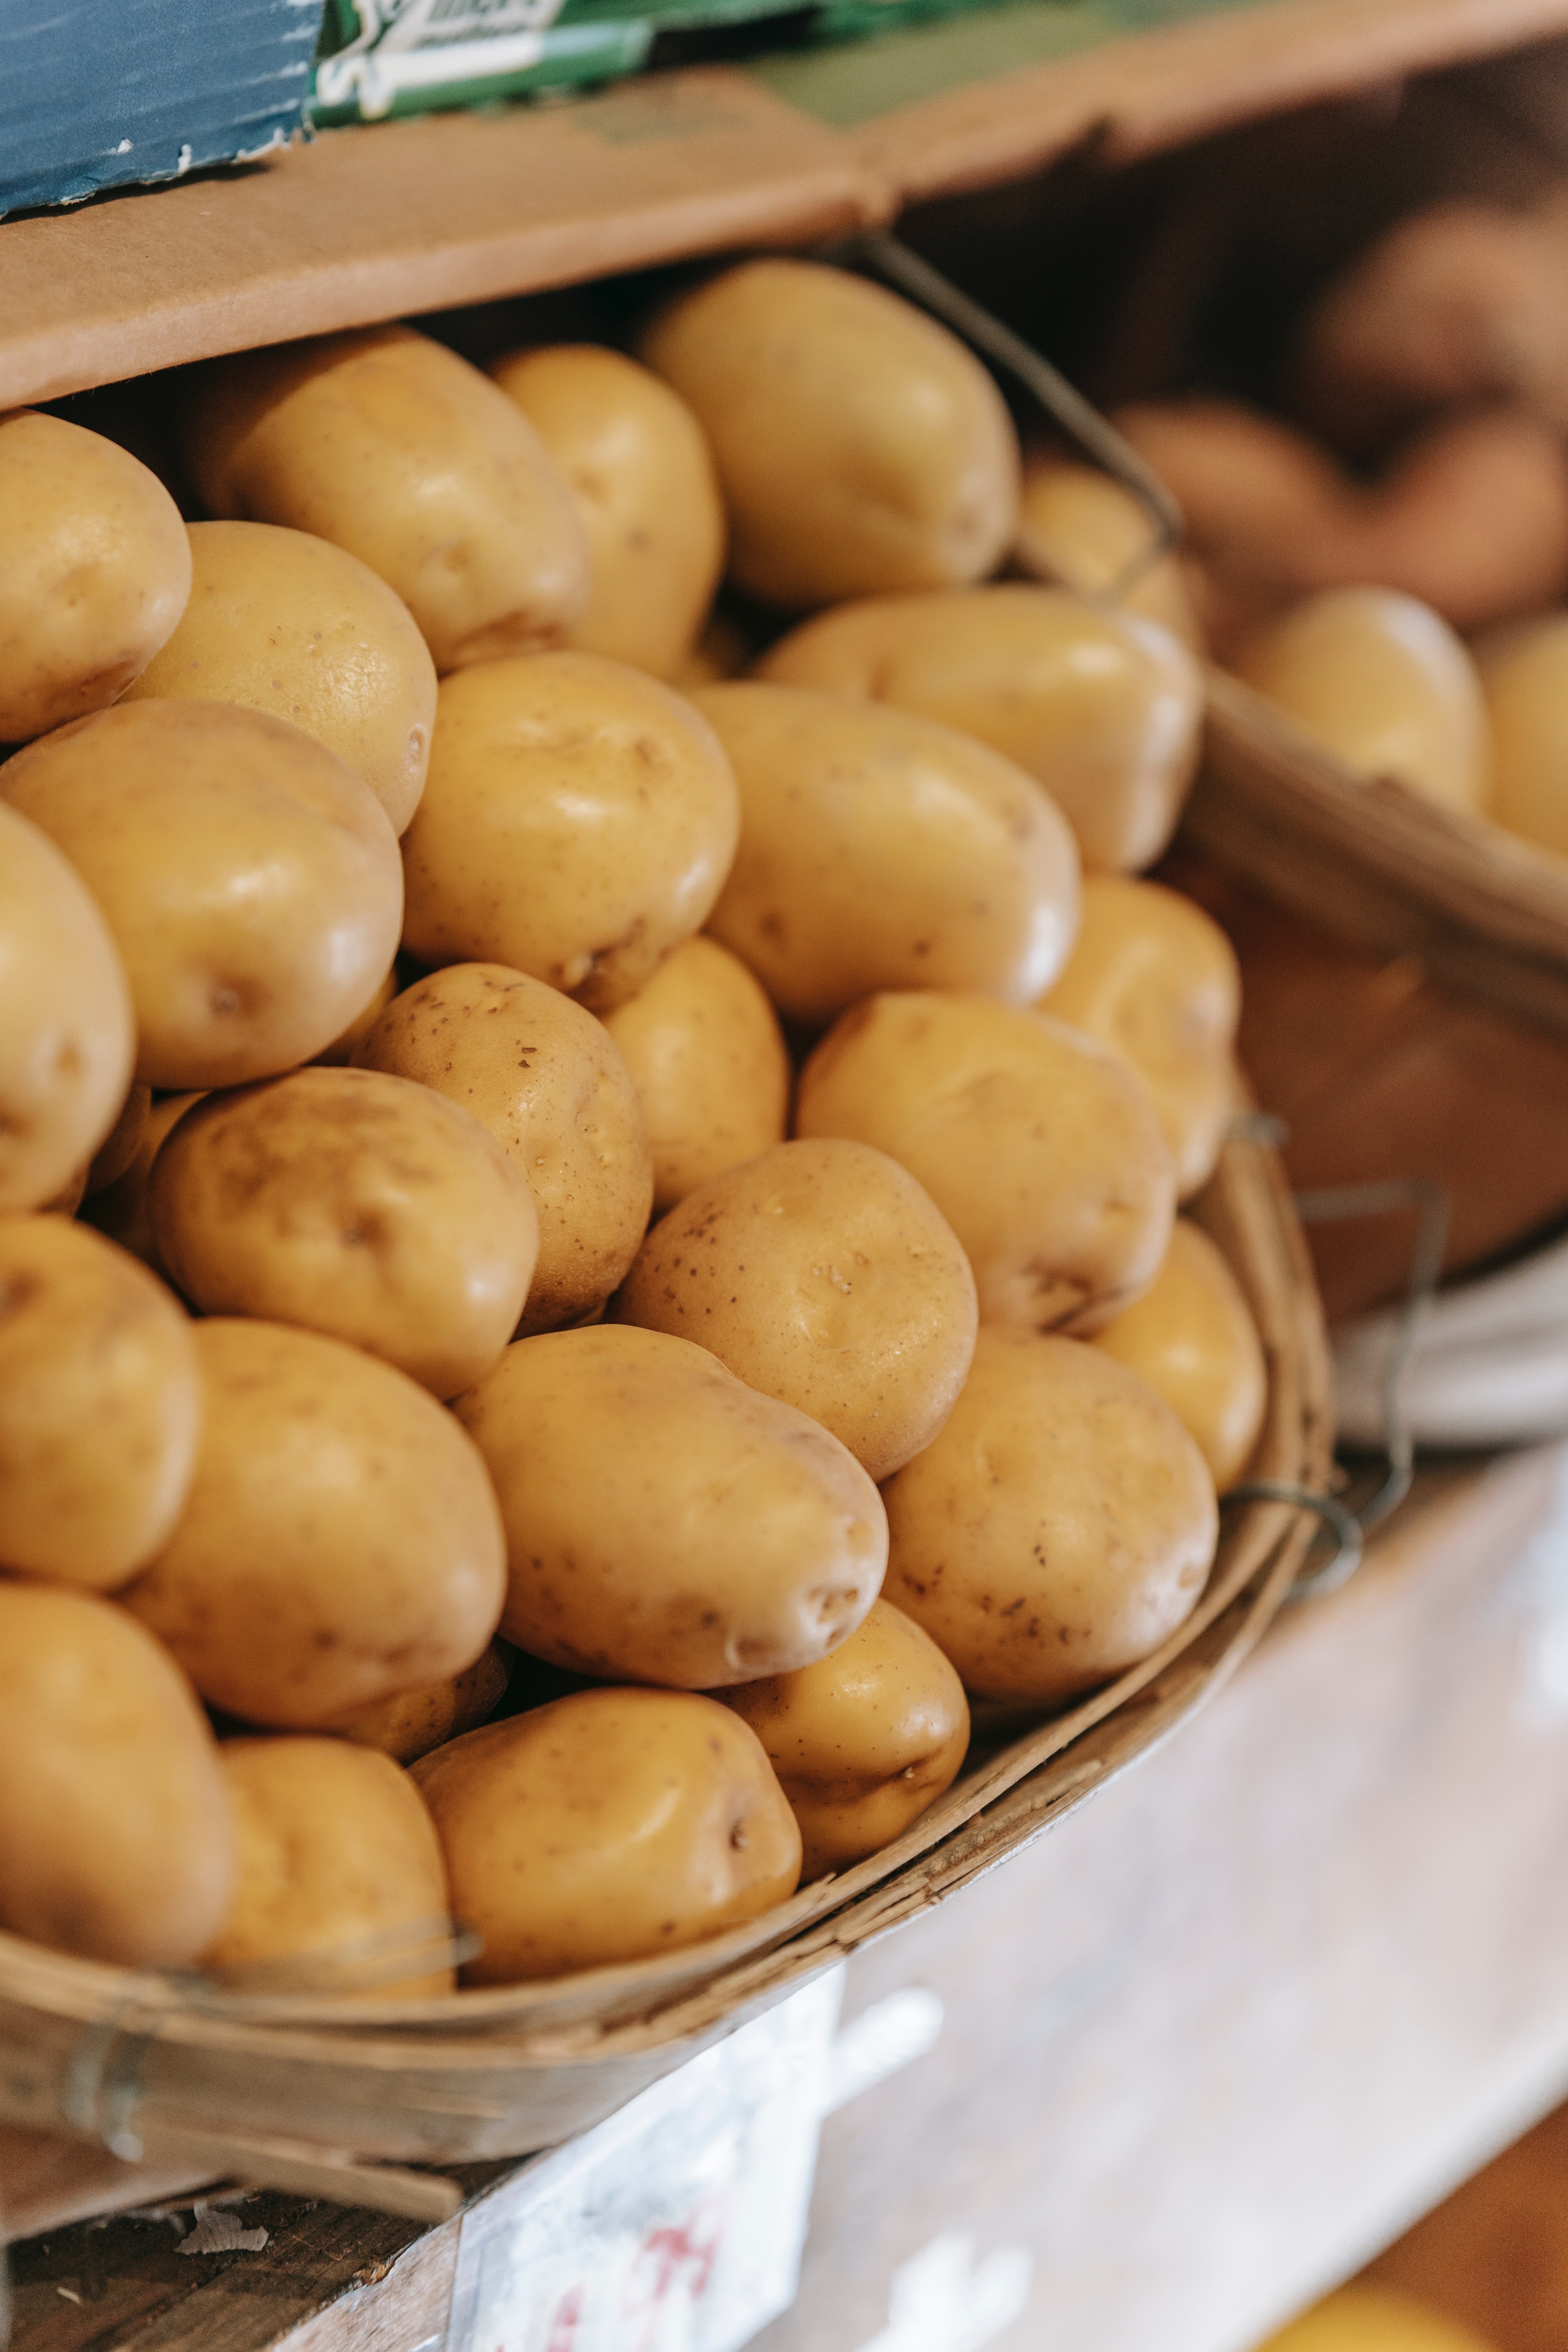 potatoes placed on the counter in market